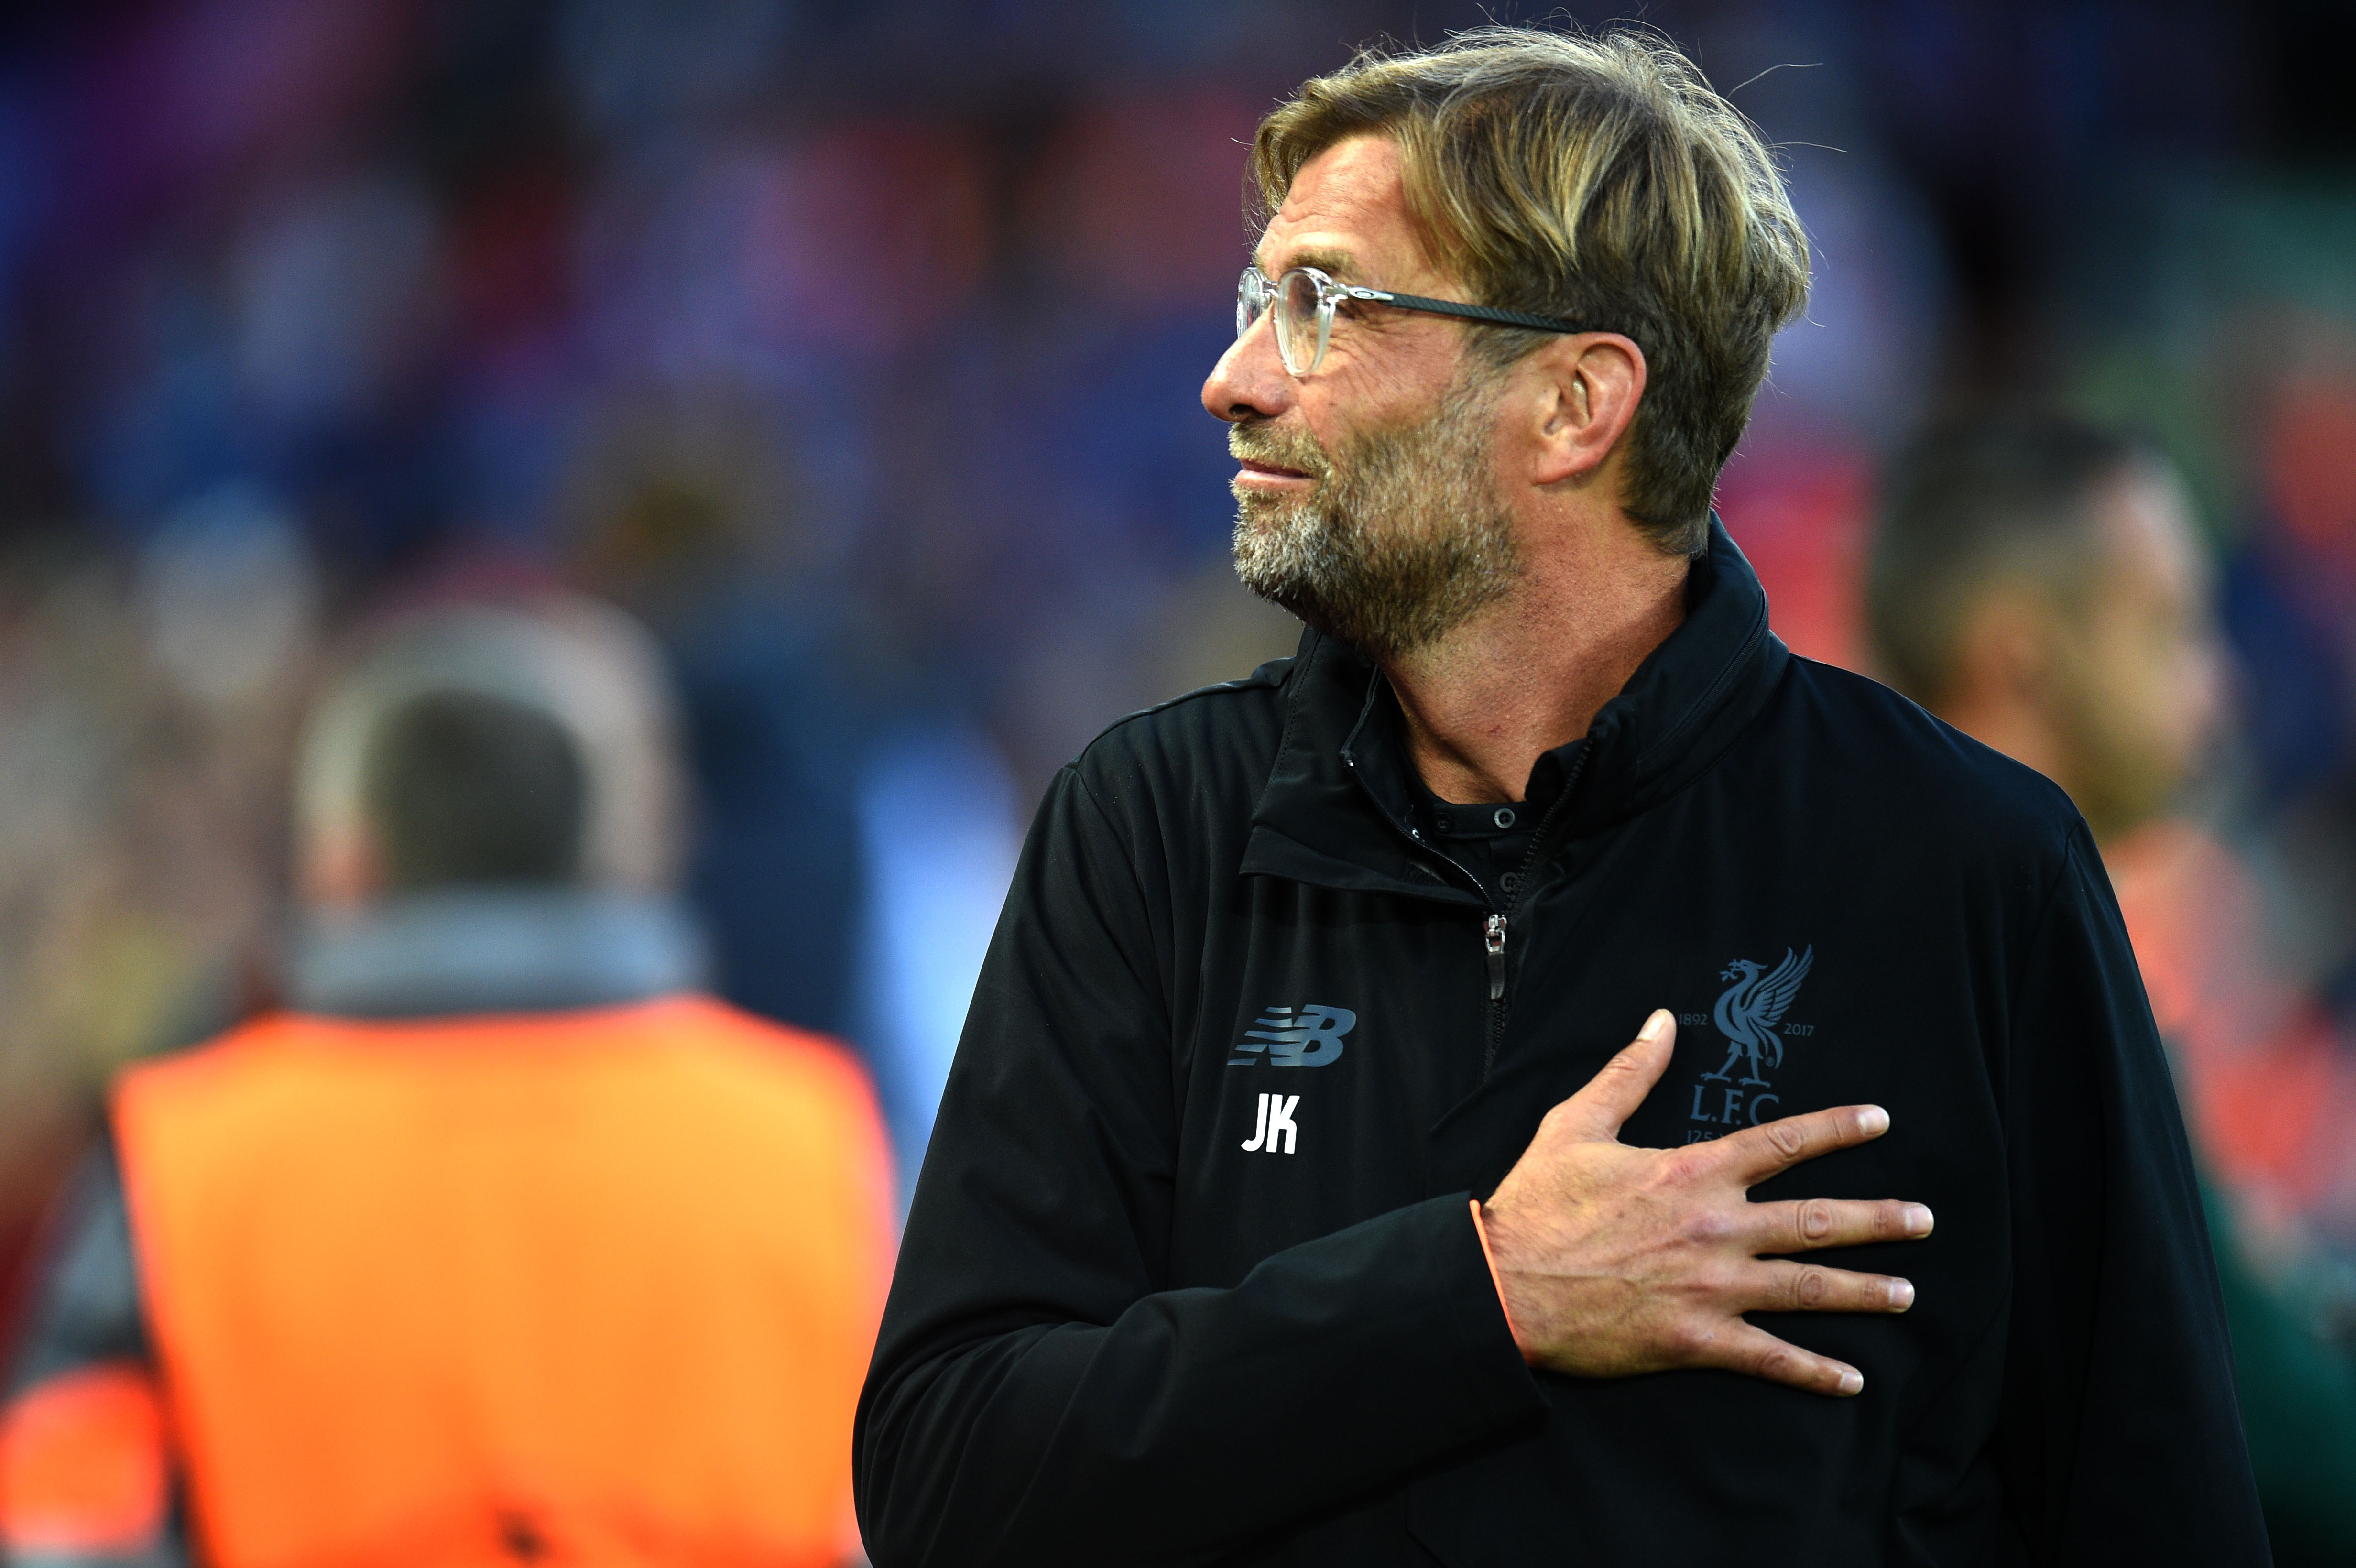 Liverpool's German manager Jurgen Klopp gestures  before the Champions League qualifier, second leg match between Liverpool and Hoffenheim at Anfield stadium in Liverpool on August 23, 2017. / AFP PHOTO / Oli SCARFF        (Photo credit should read OLI SCARFF/AFP/Getty Images)